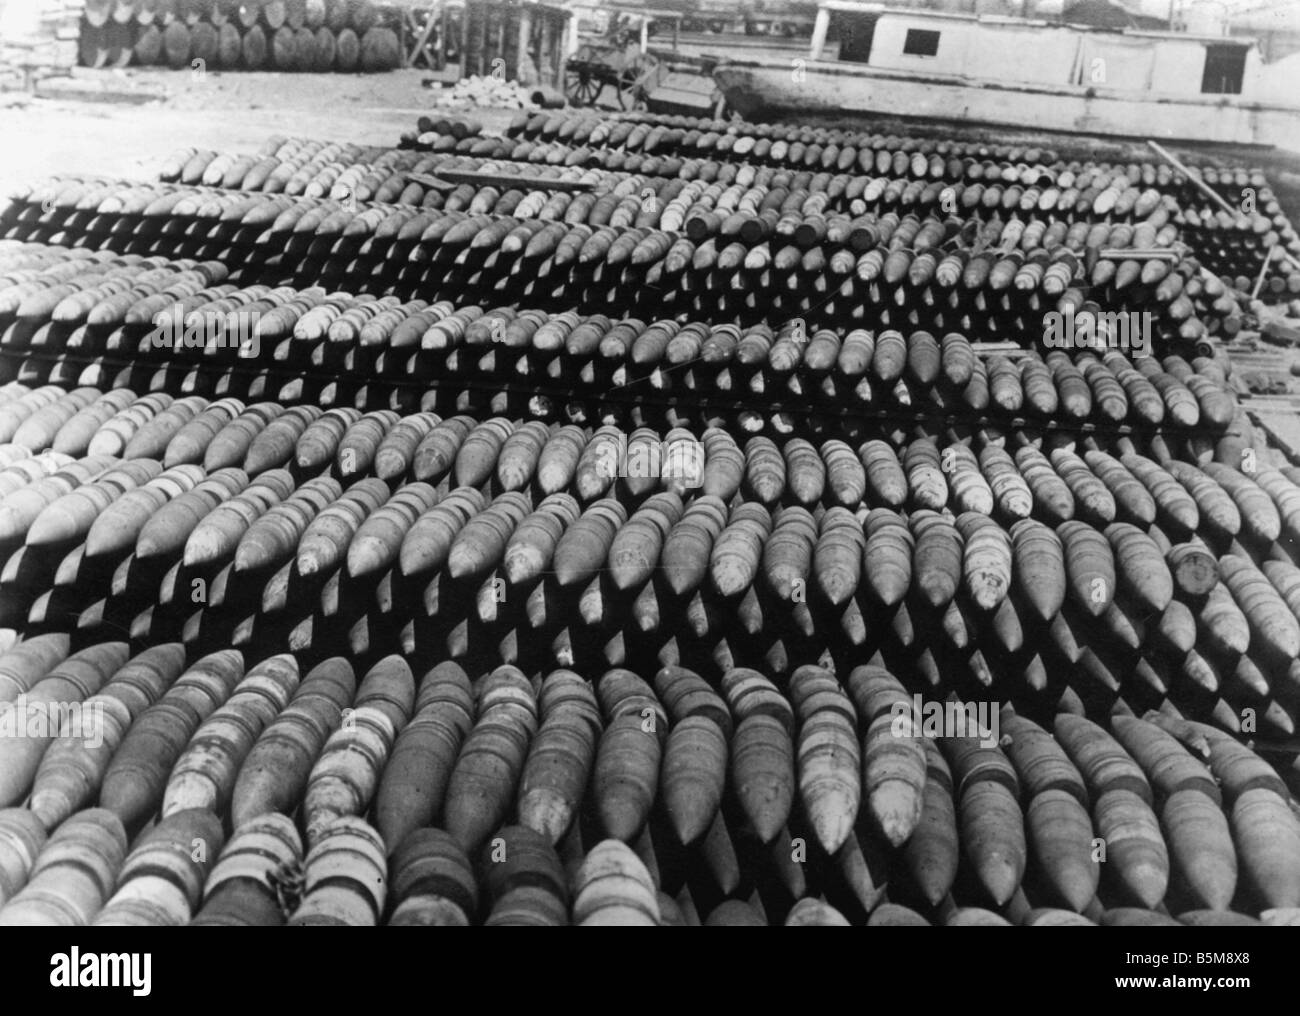 Rows of German shells WWI 1918 History World War I War spoils End of the war 1918 Captured German shells in Pewark Photo Stock Photo